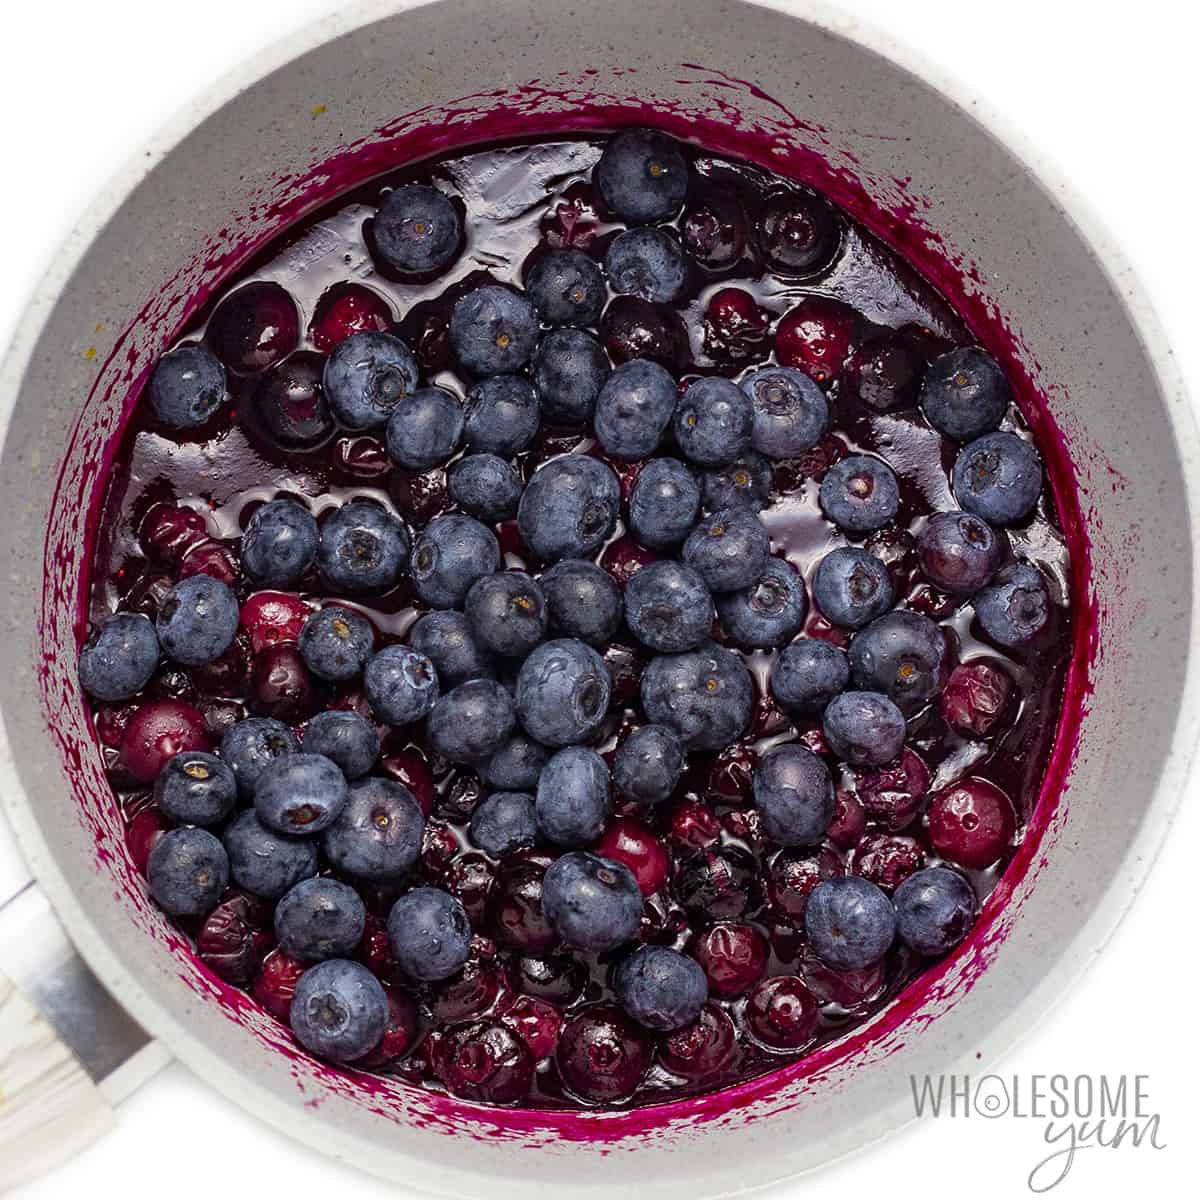 Blueberry sauce with fresh berries added.